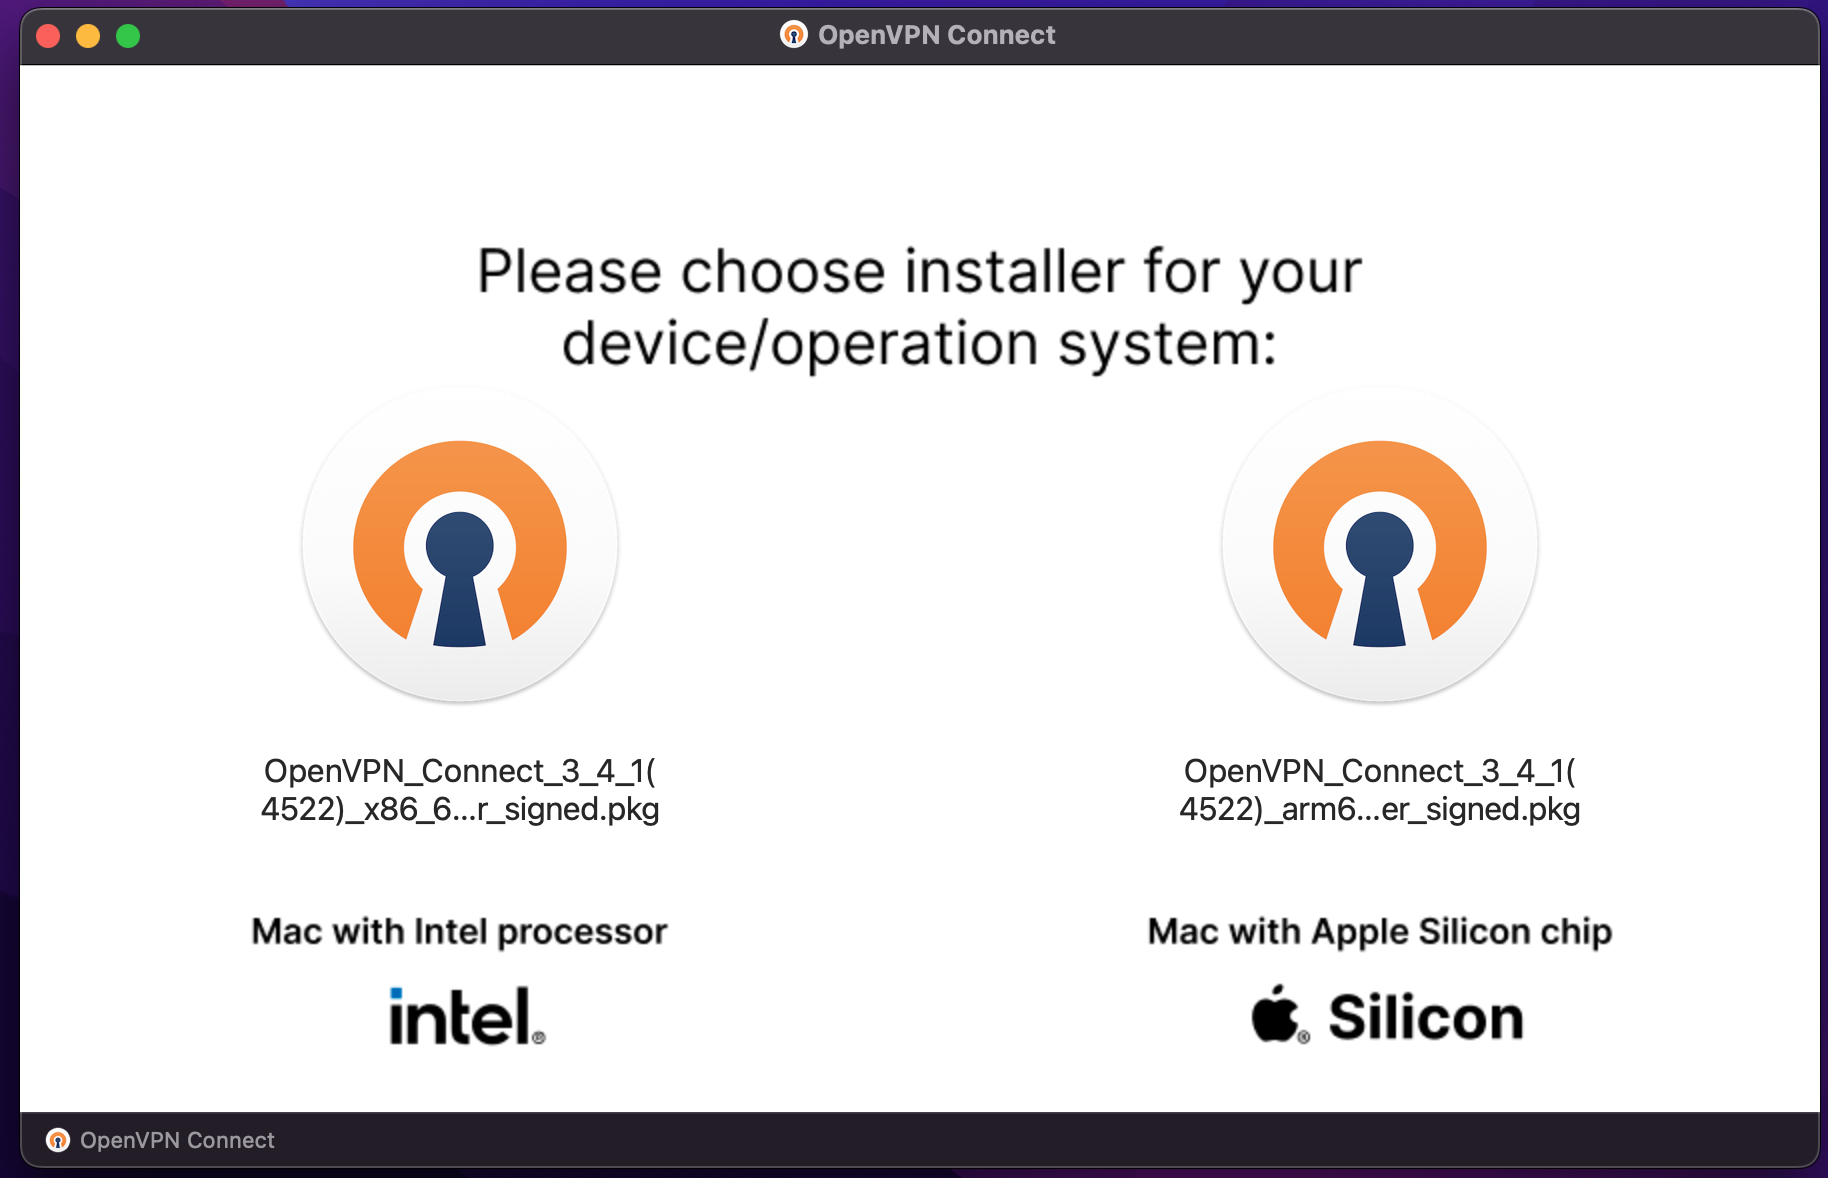 Please choose installer for your device/operation system